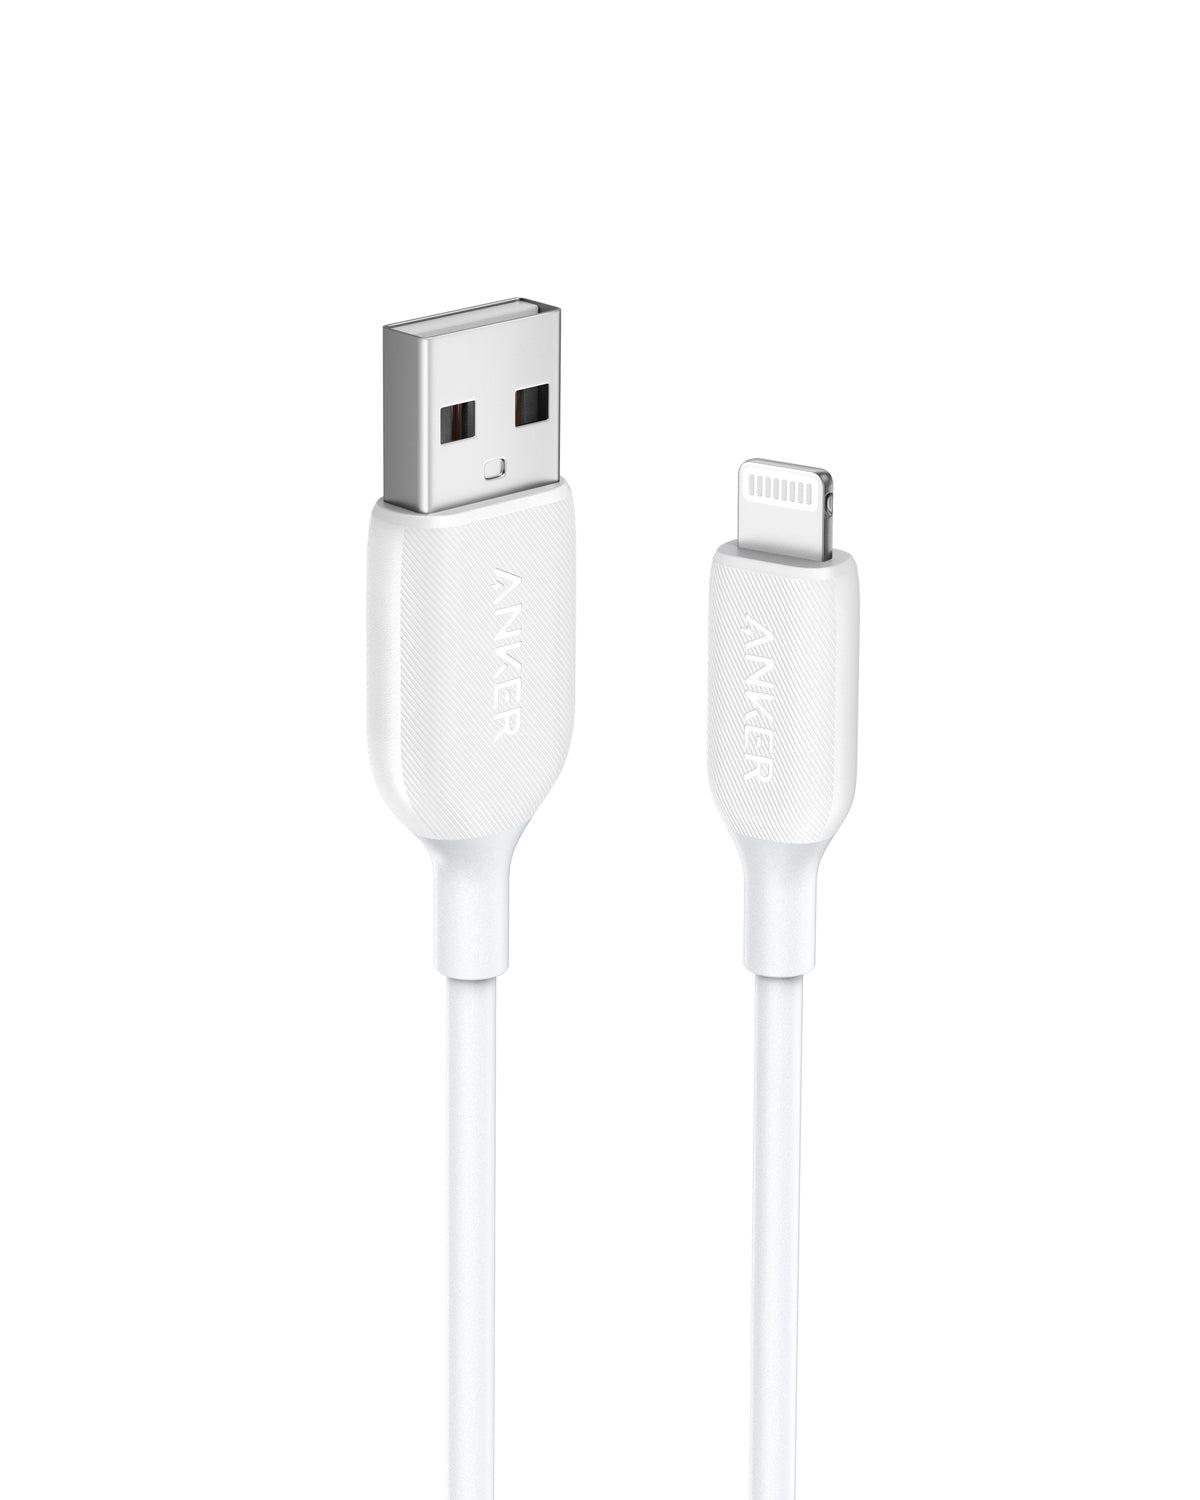 Anker <b>541</b> USB-A to Lightning Cable (0.9m / 1.8m)